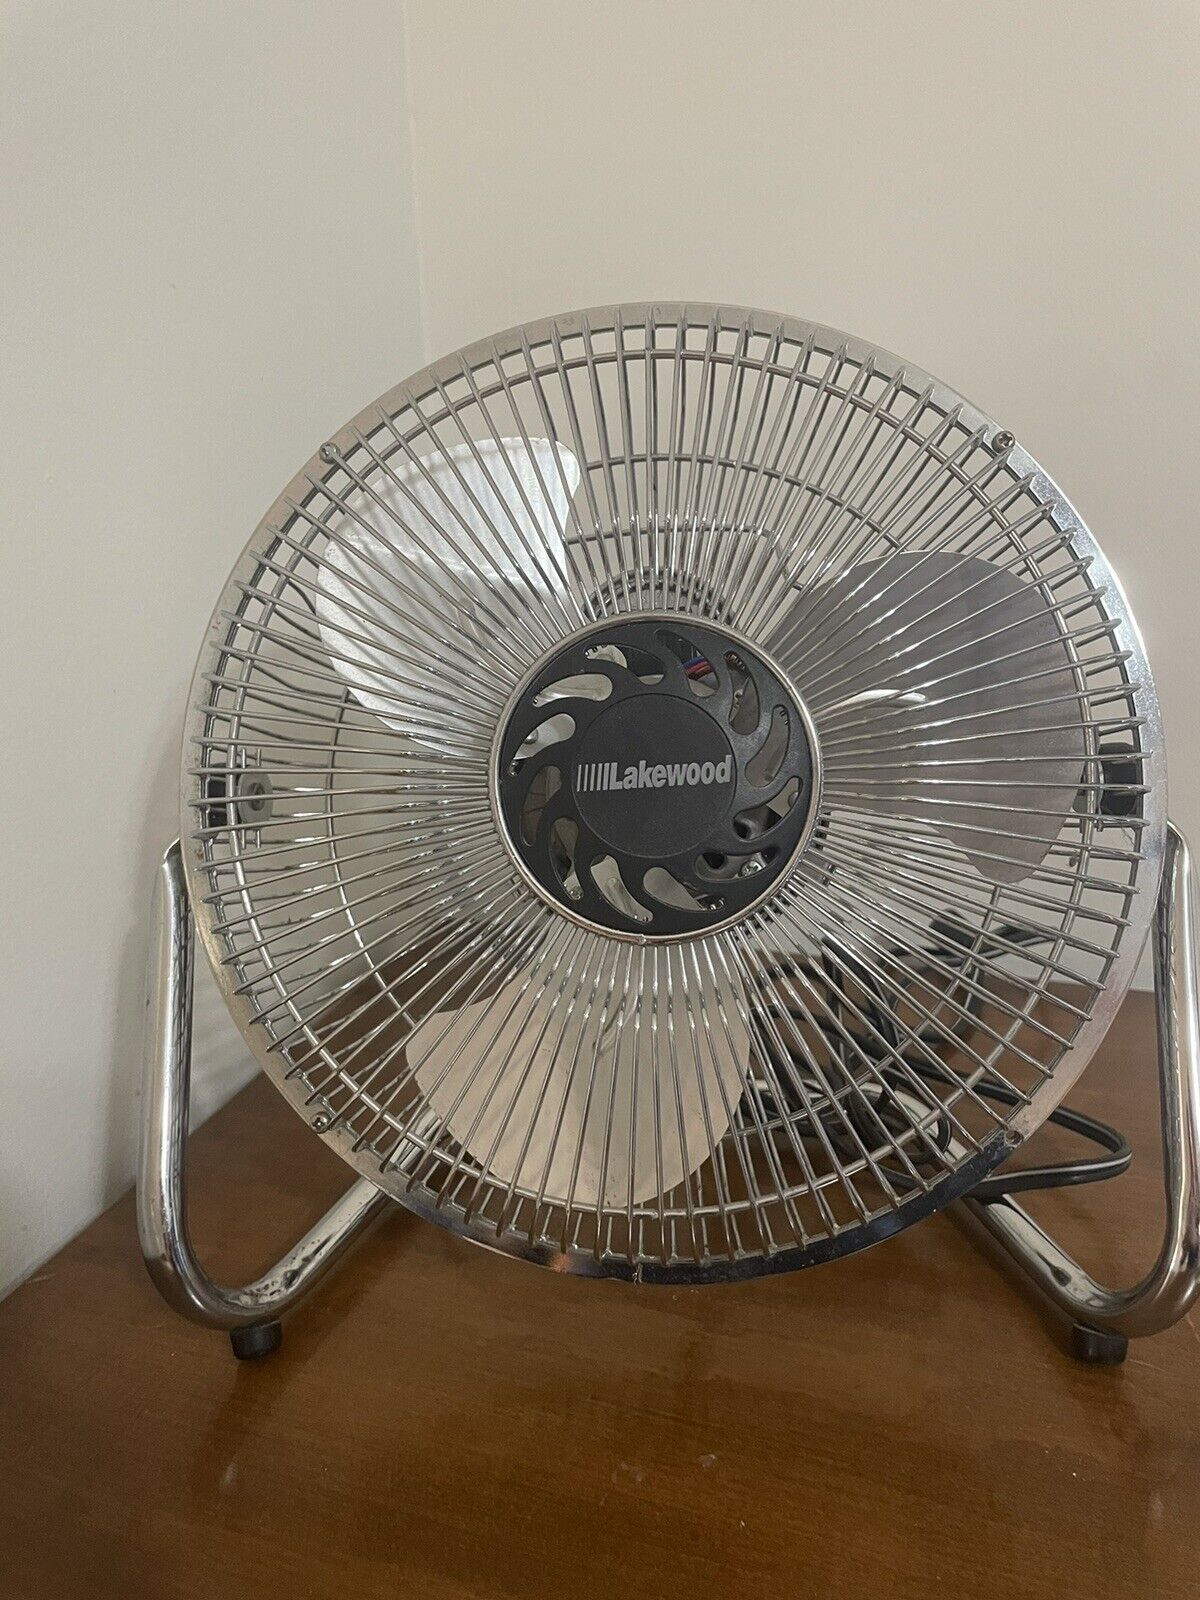 Vintage Lakewood Electric 3 Speed Chrome Fan Model HV-9 Tested and Working Clean